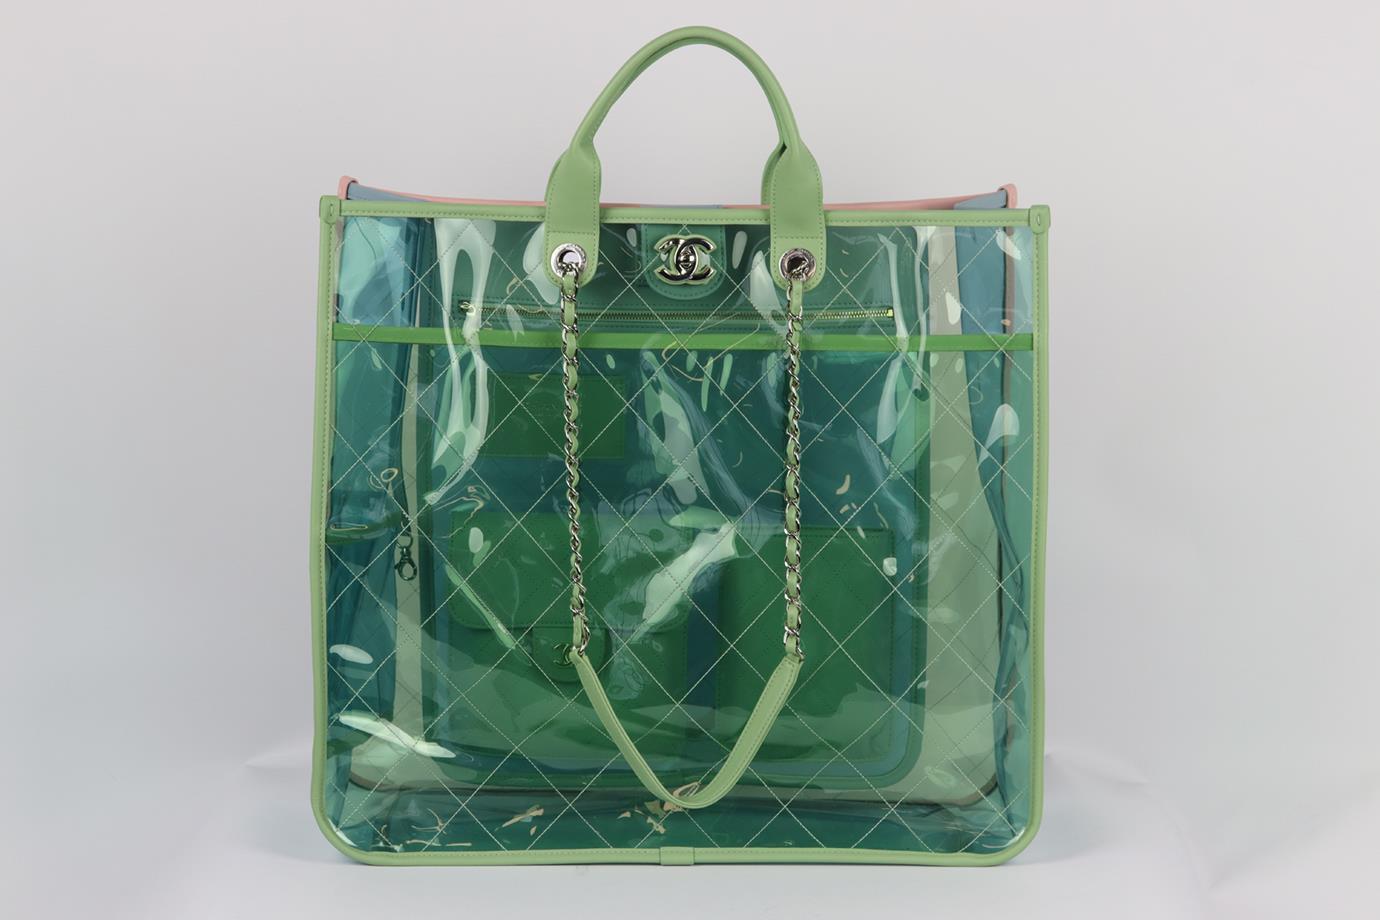 Chanel 2018 Coco Splash quilted perspex and leather tote bag. Made in Italy, this beautiful 2018 ‘Coco Splash’ tote bag has been made from light-green quilted perspex exterior with light-blue leather interior detail, this piece is decorated with a